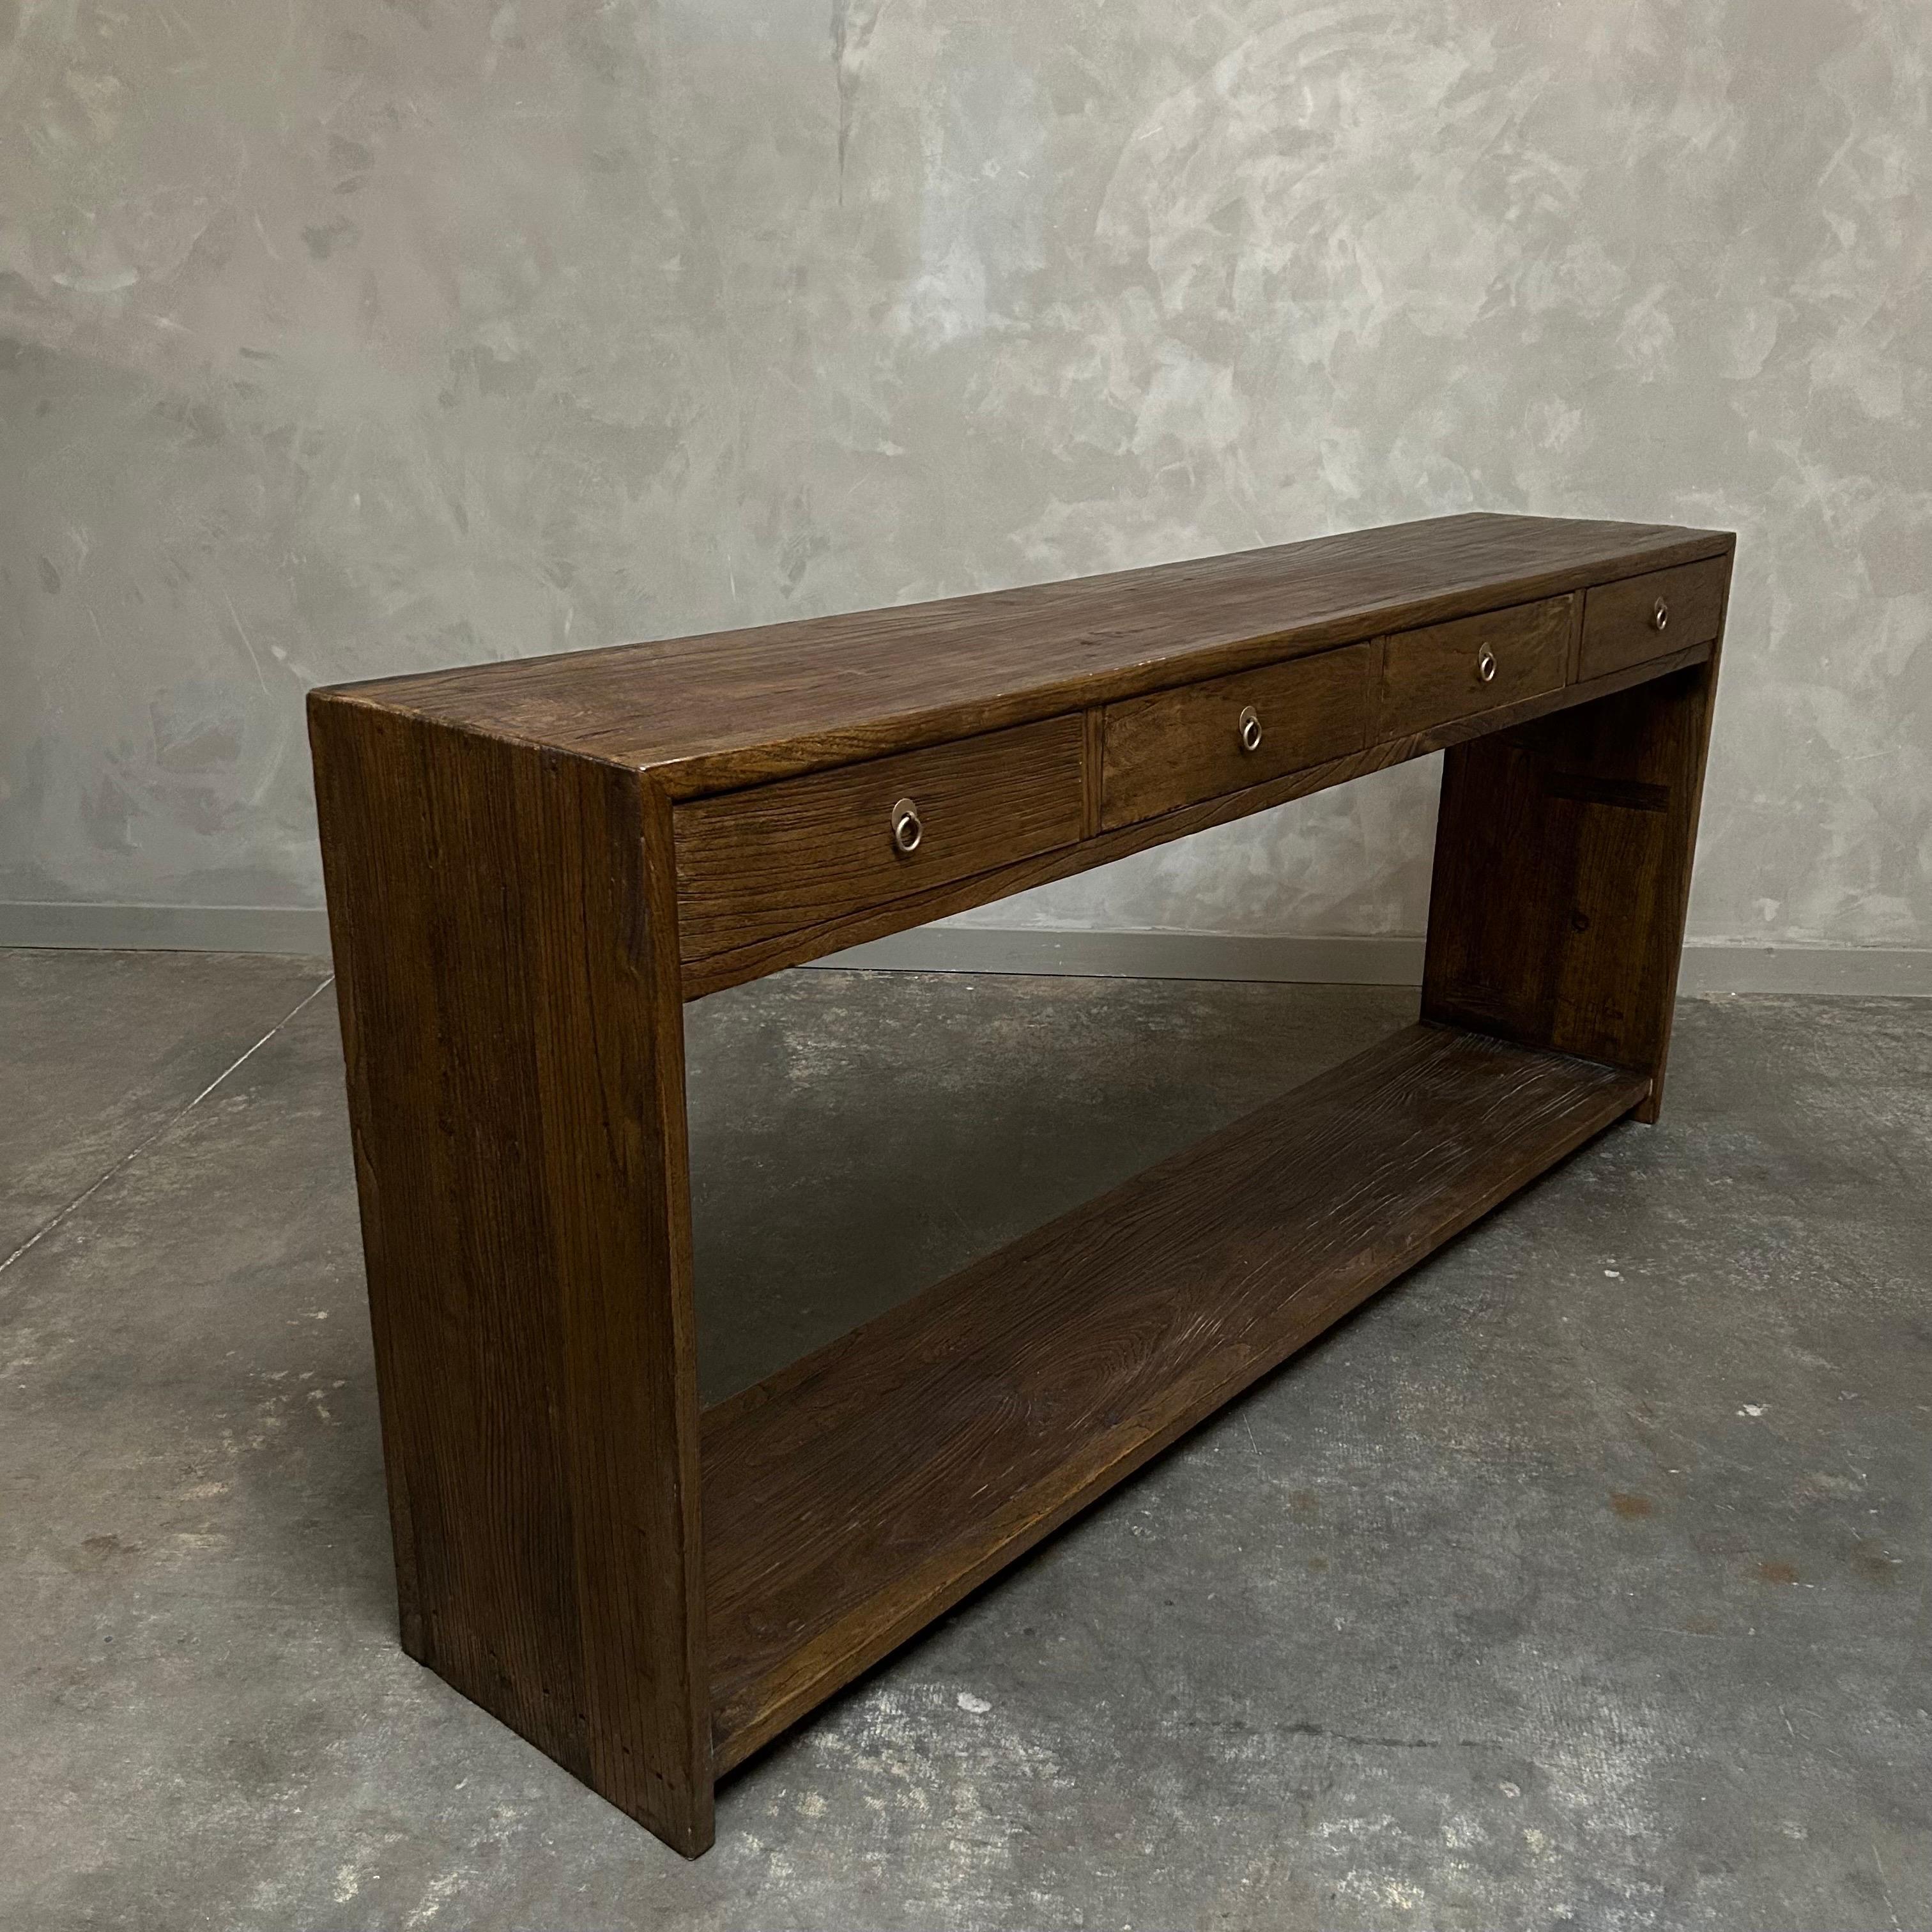 Custom Elm Wood Modern Console Table with Drawers in Dark Walnut For Sale 4